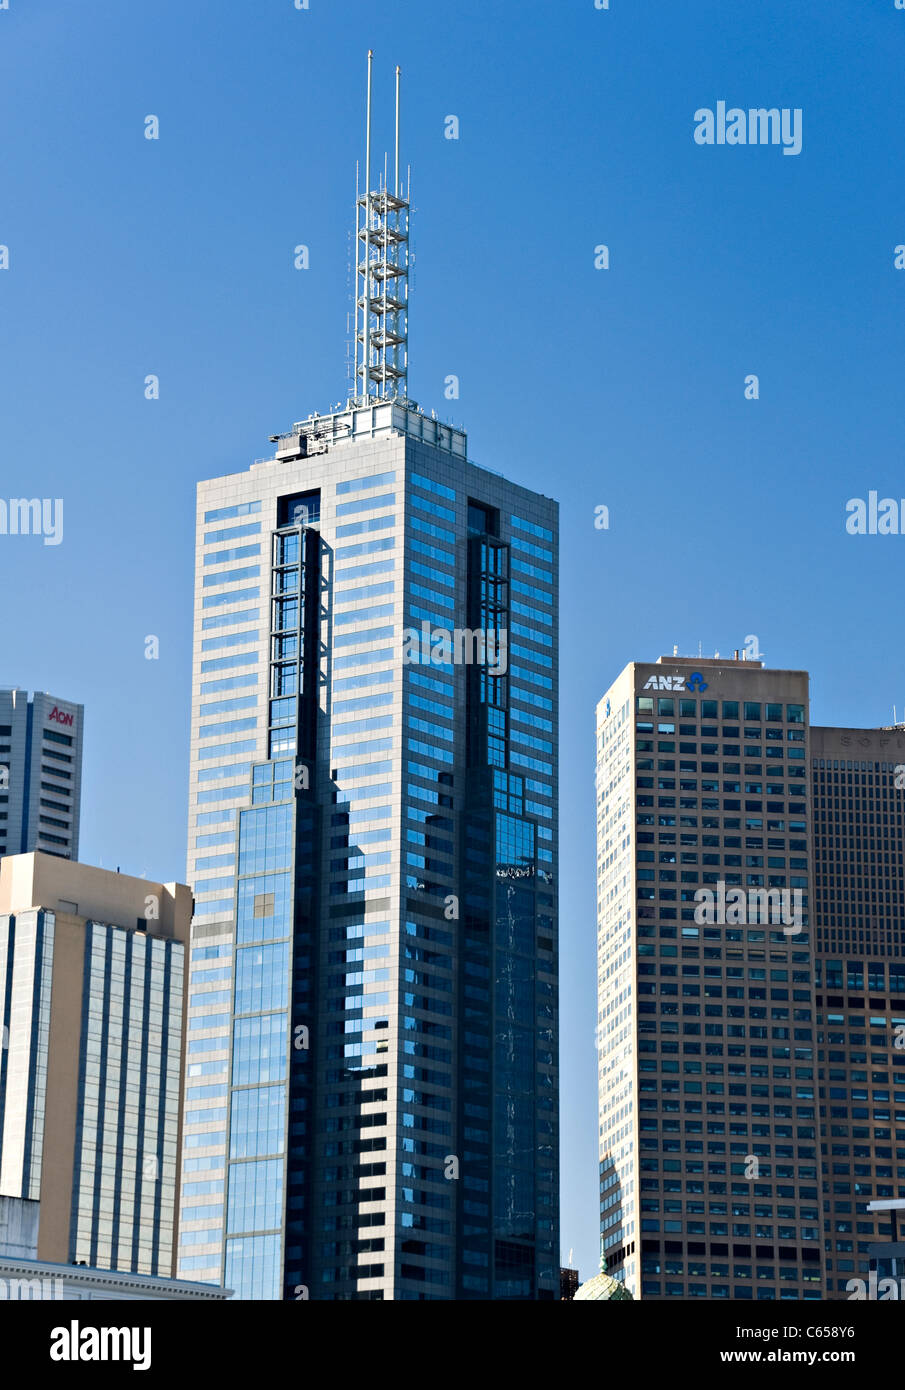 High Quality Stock Photos of collins street